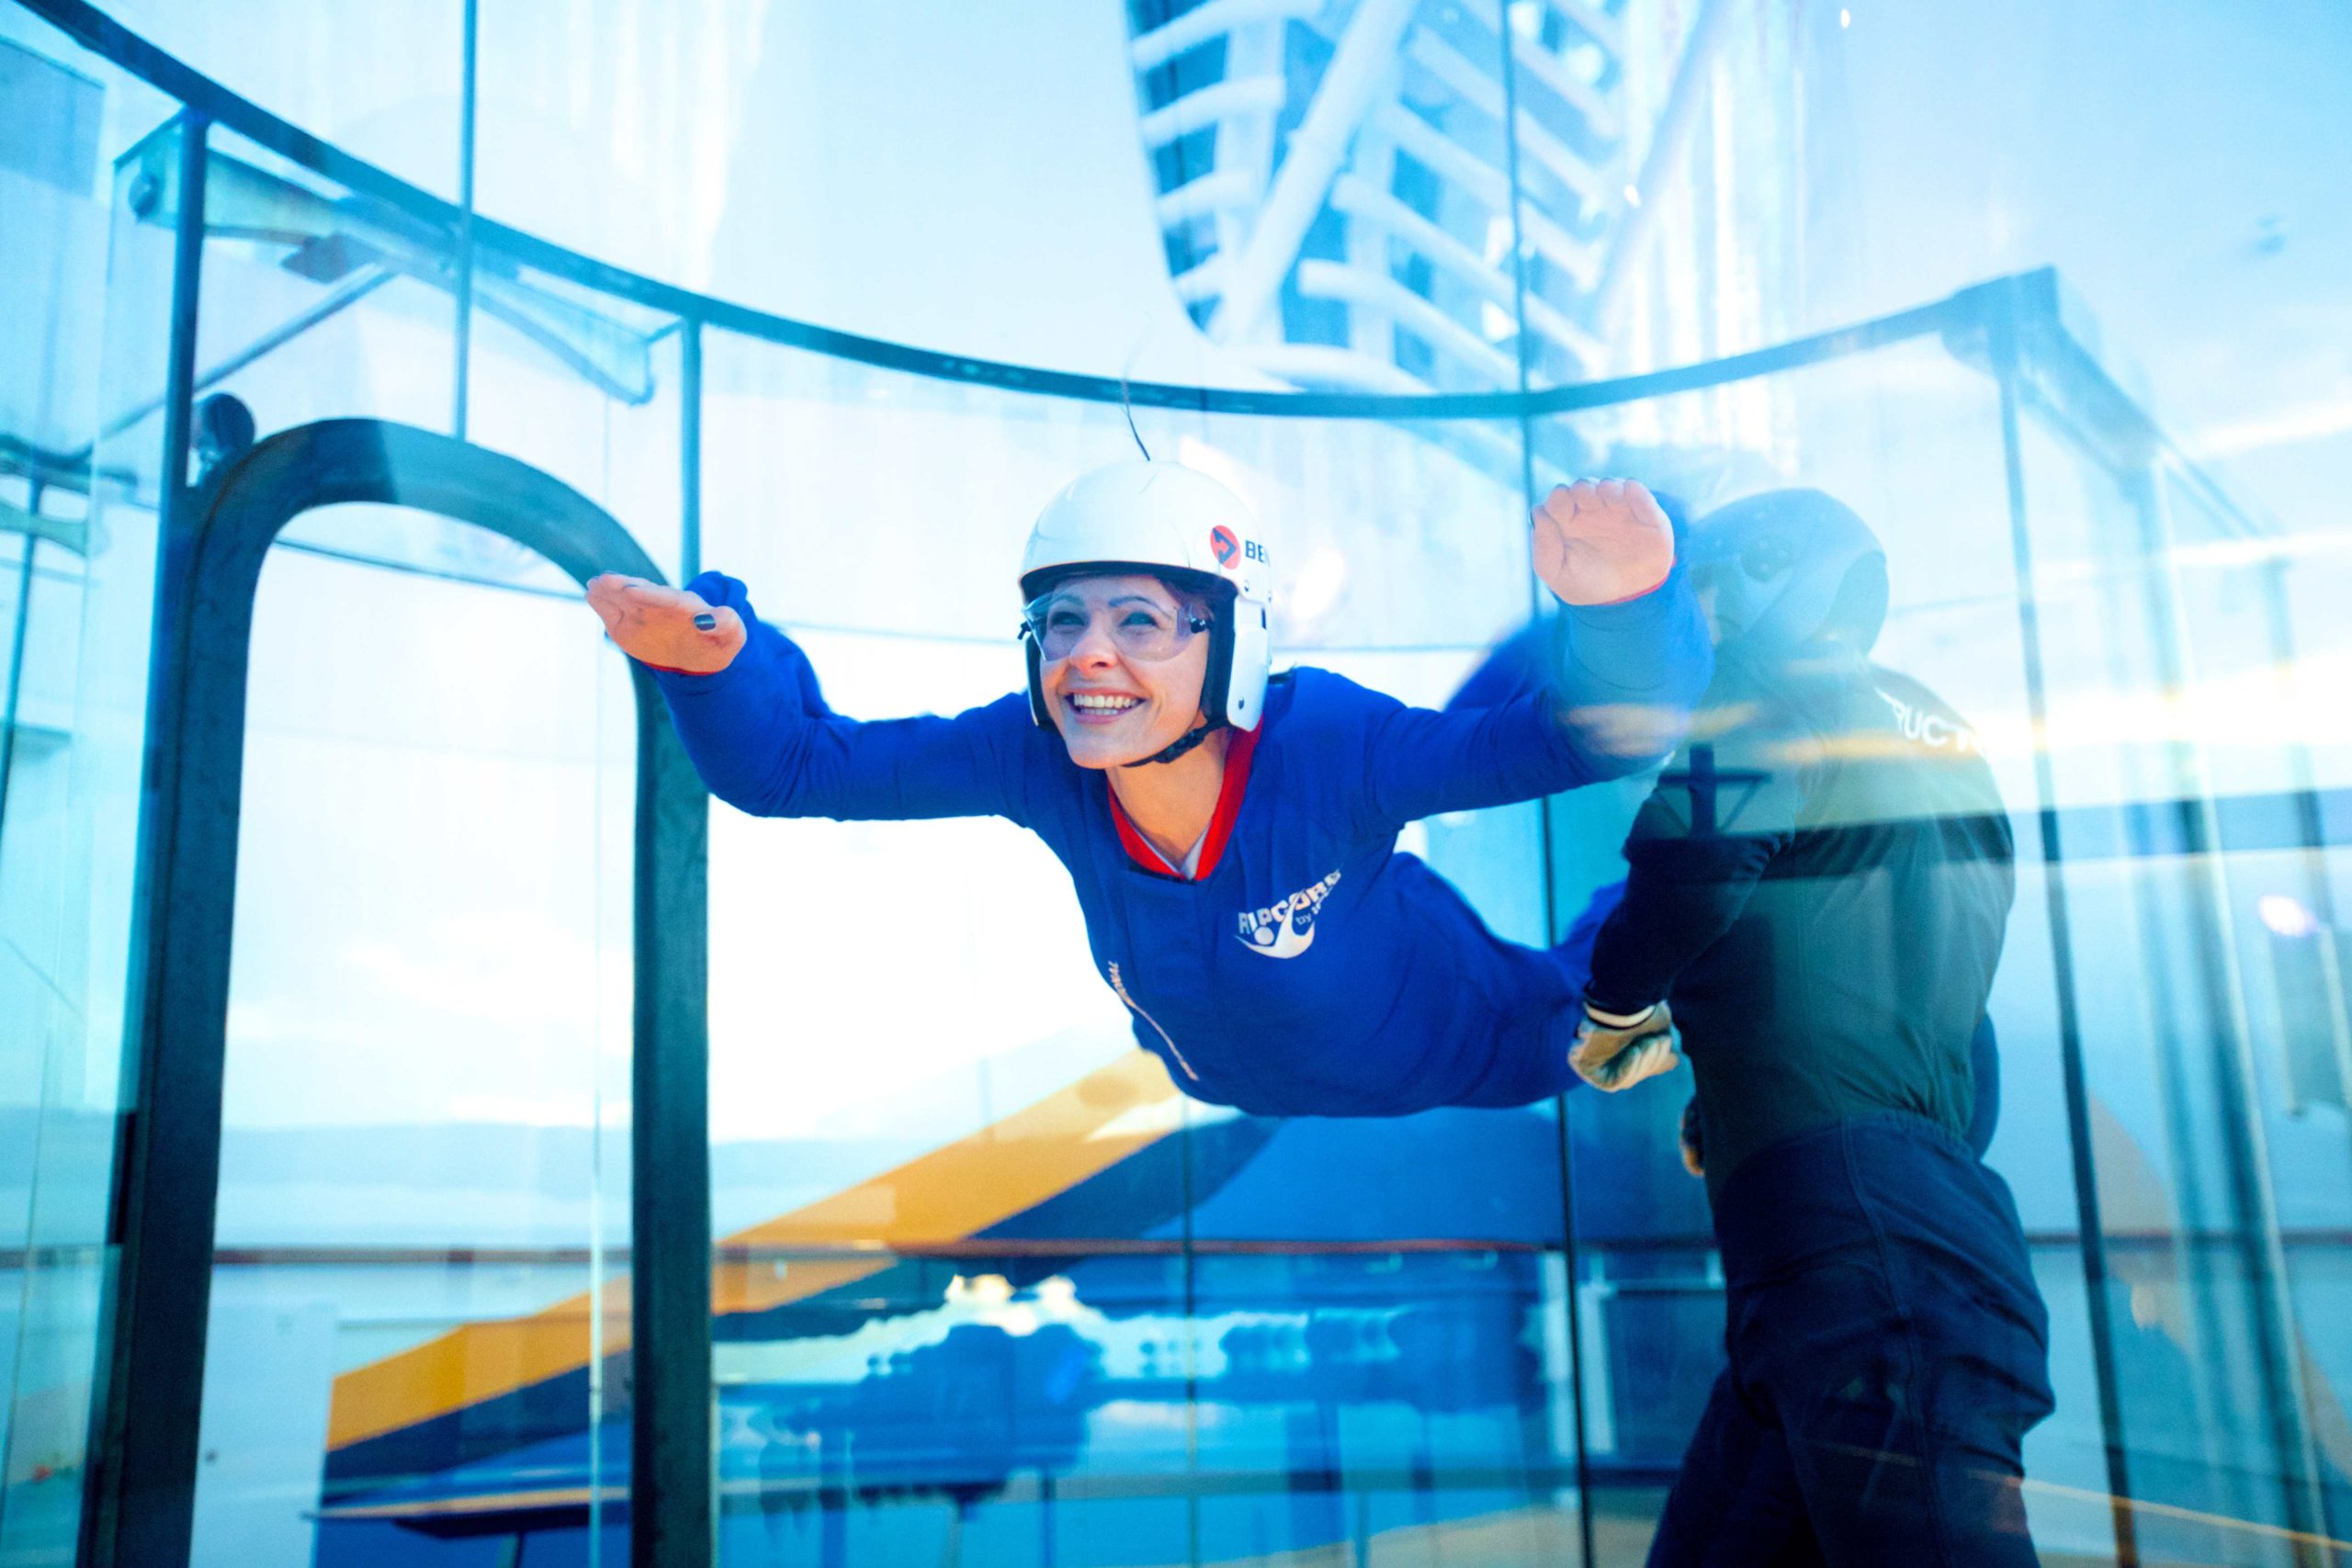 A simulated skydiving experience with RipCord by iFLY